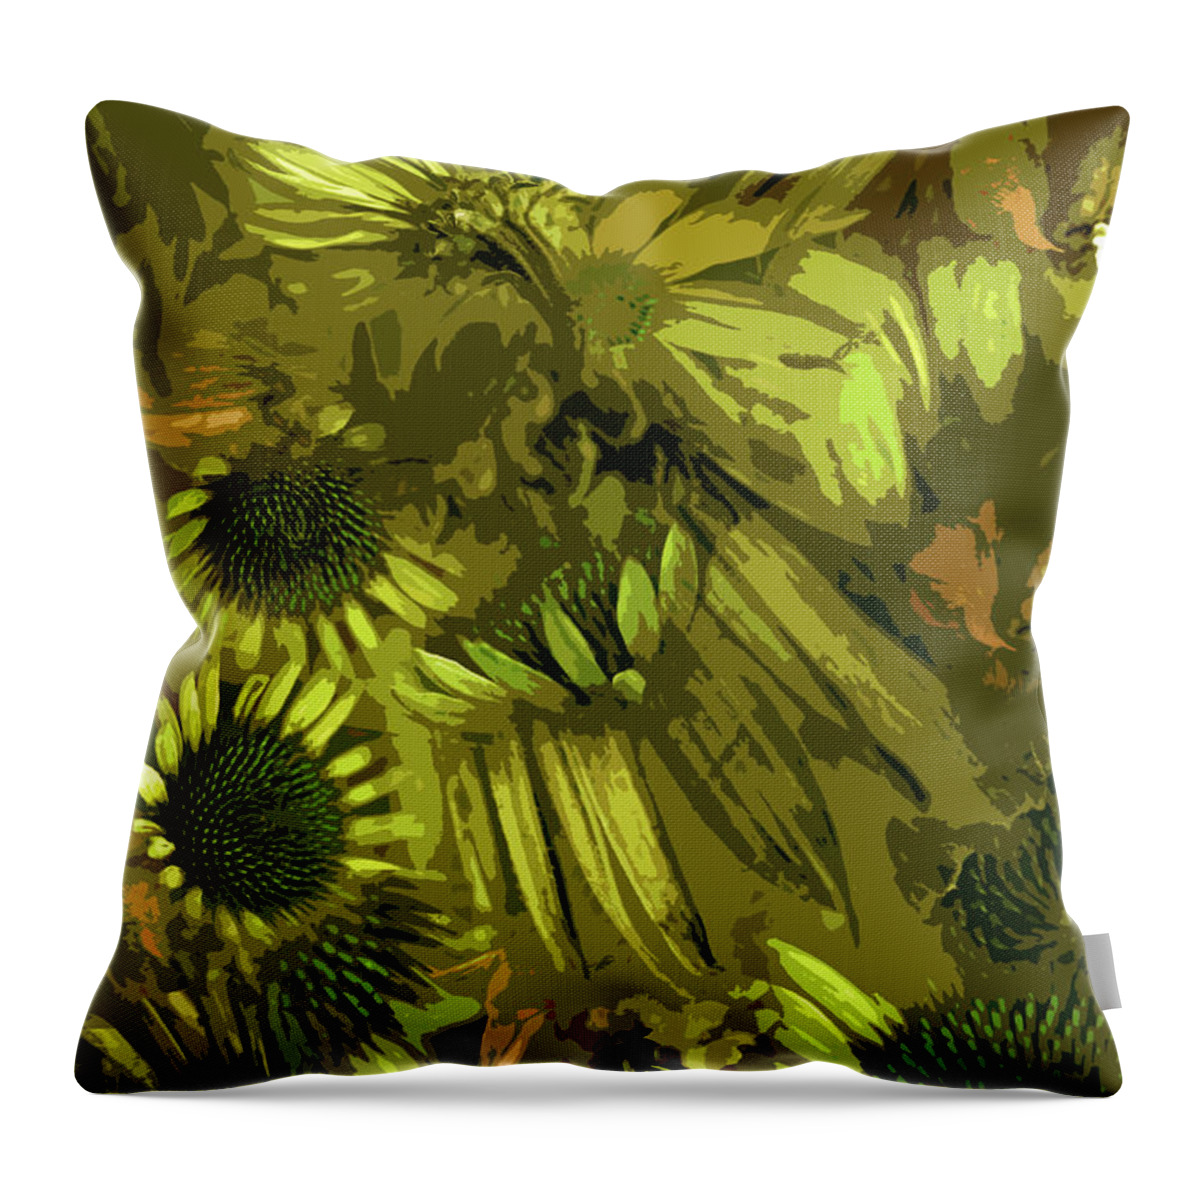 Mixed Media Art Throw Pillow featuring the digital art Bounty by Bonnie Bruno